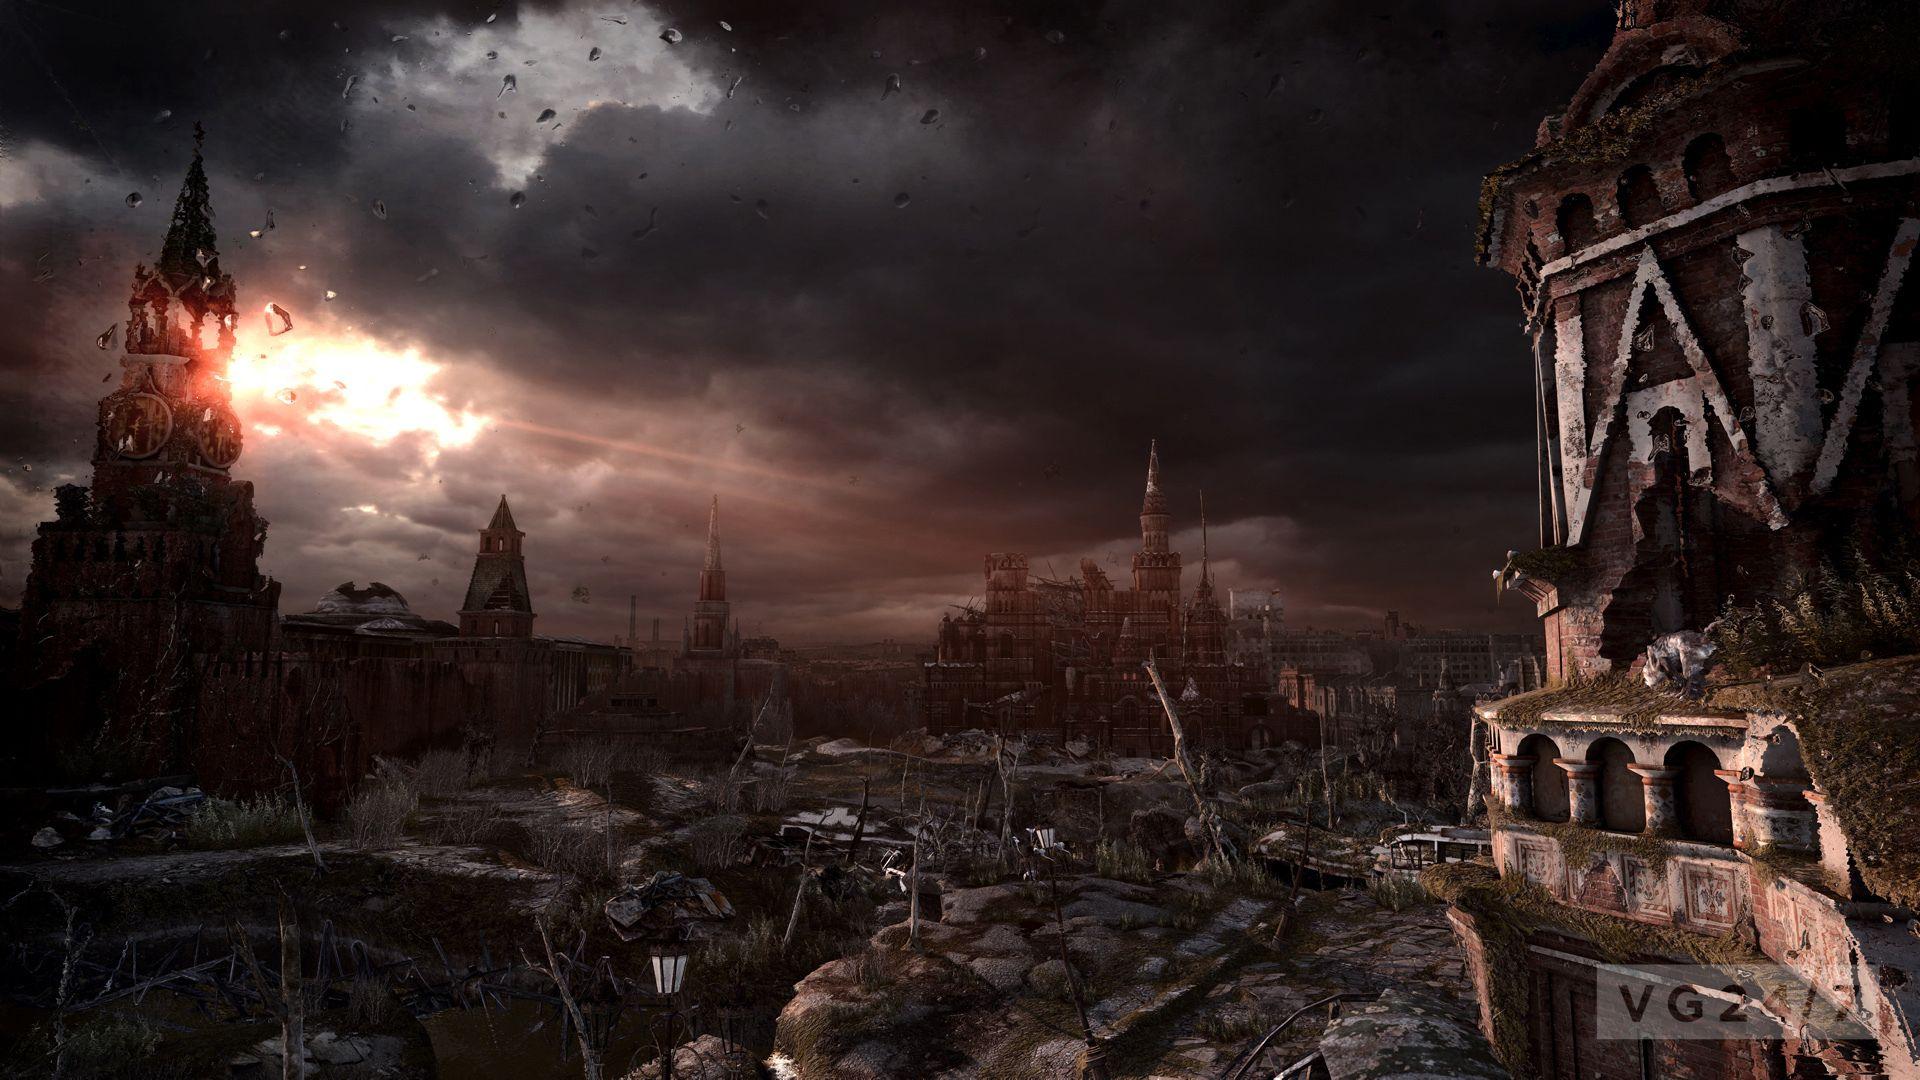 Metro: Last Light possibly “the best looking game” ever, producer